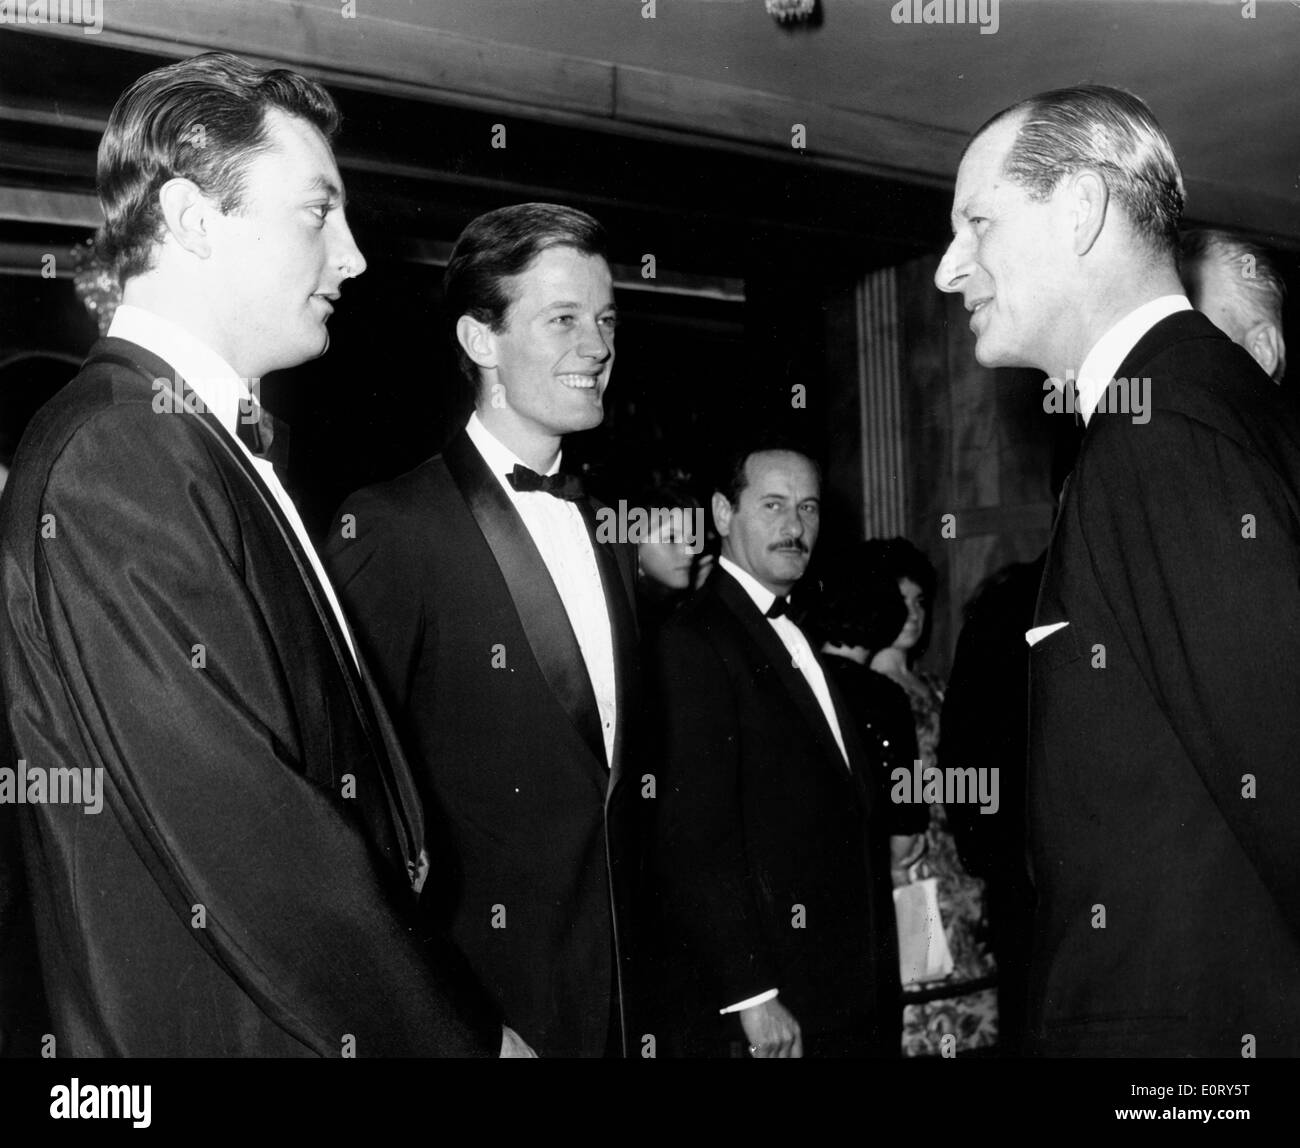 Actor Peter Fonda meets Prince Philip at a party Stock Photo